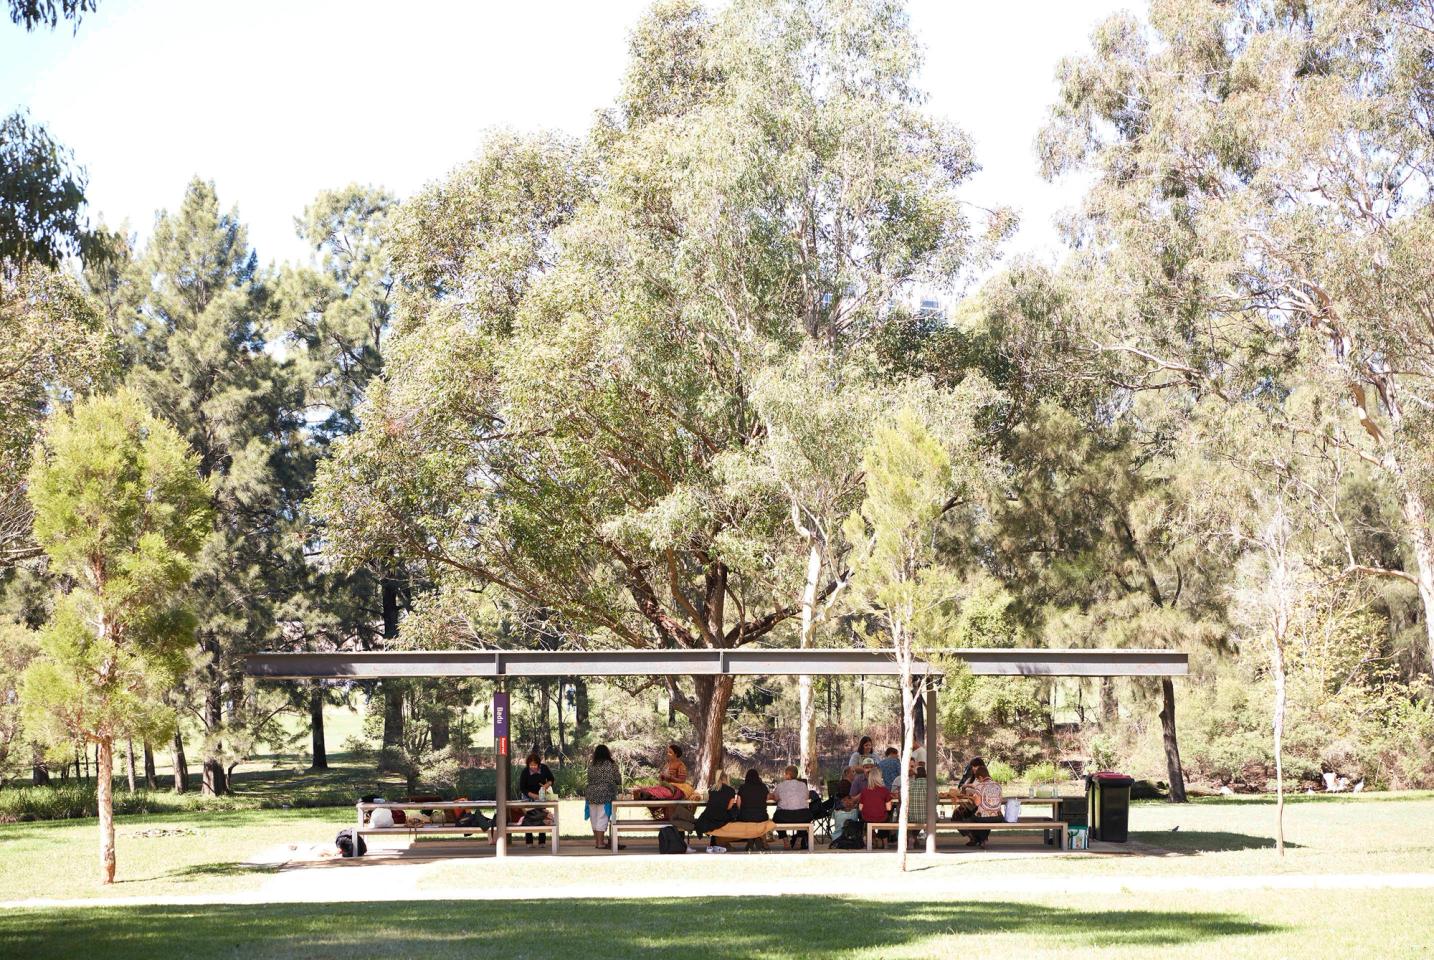 People under a shelter in a park with trees.